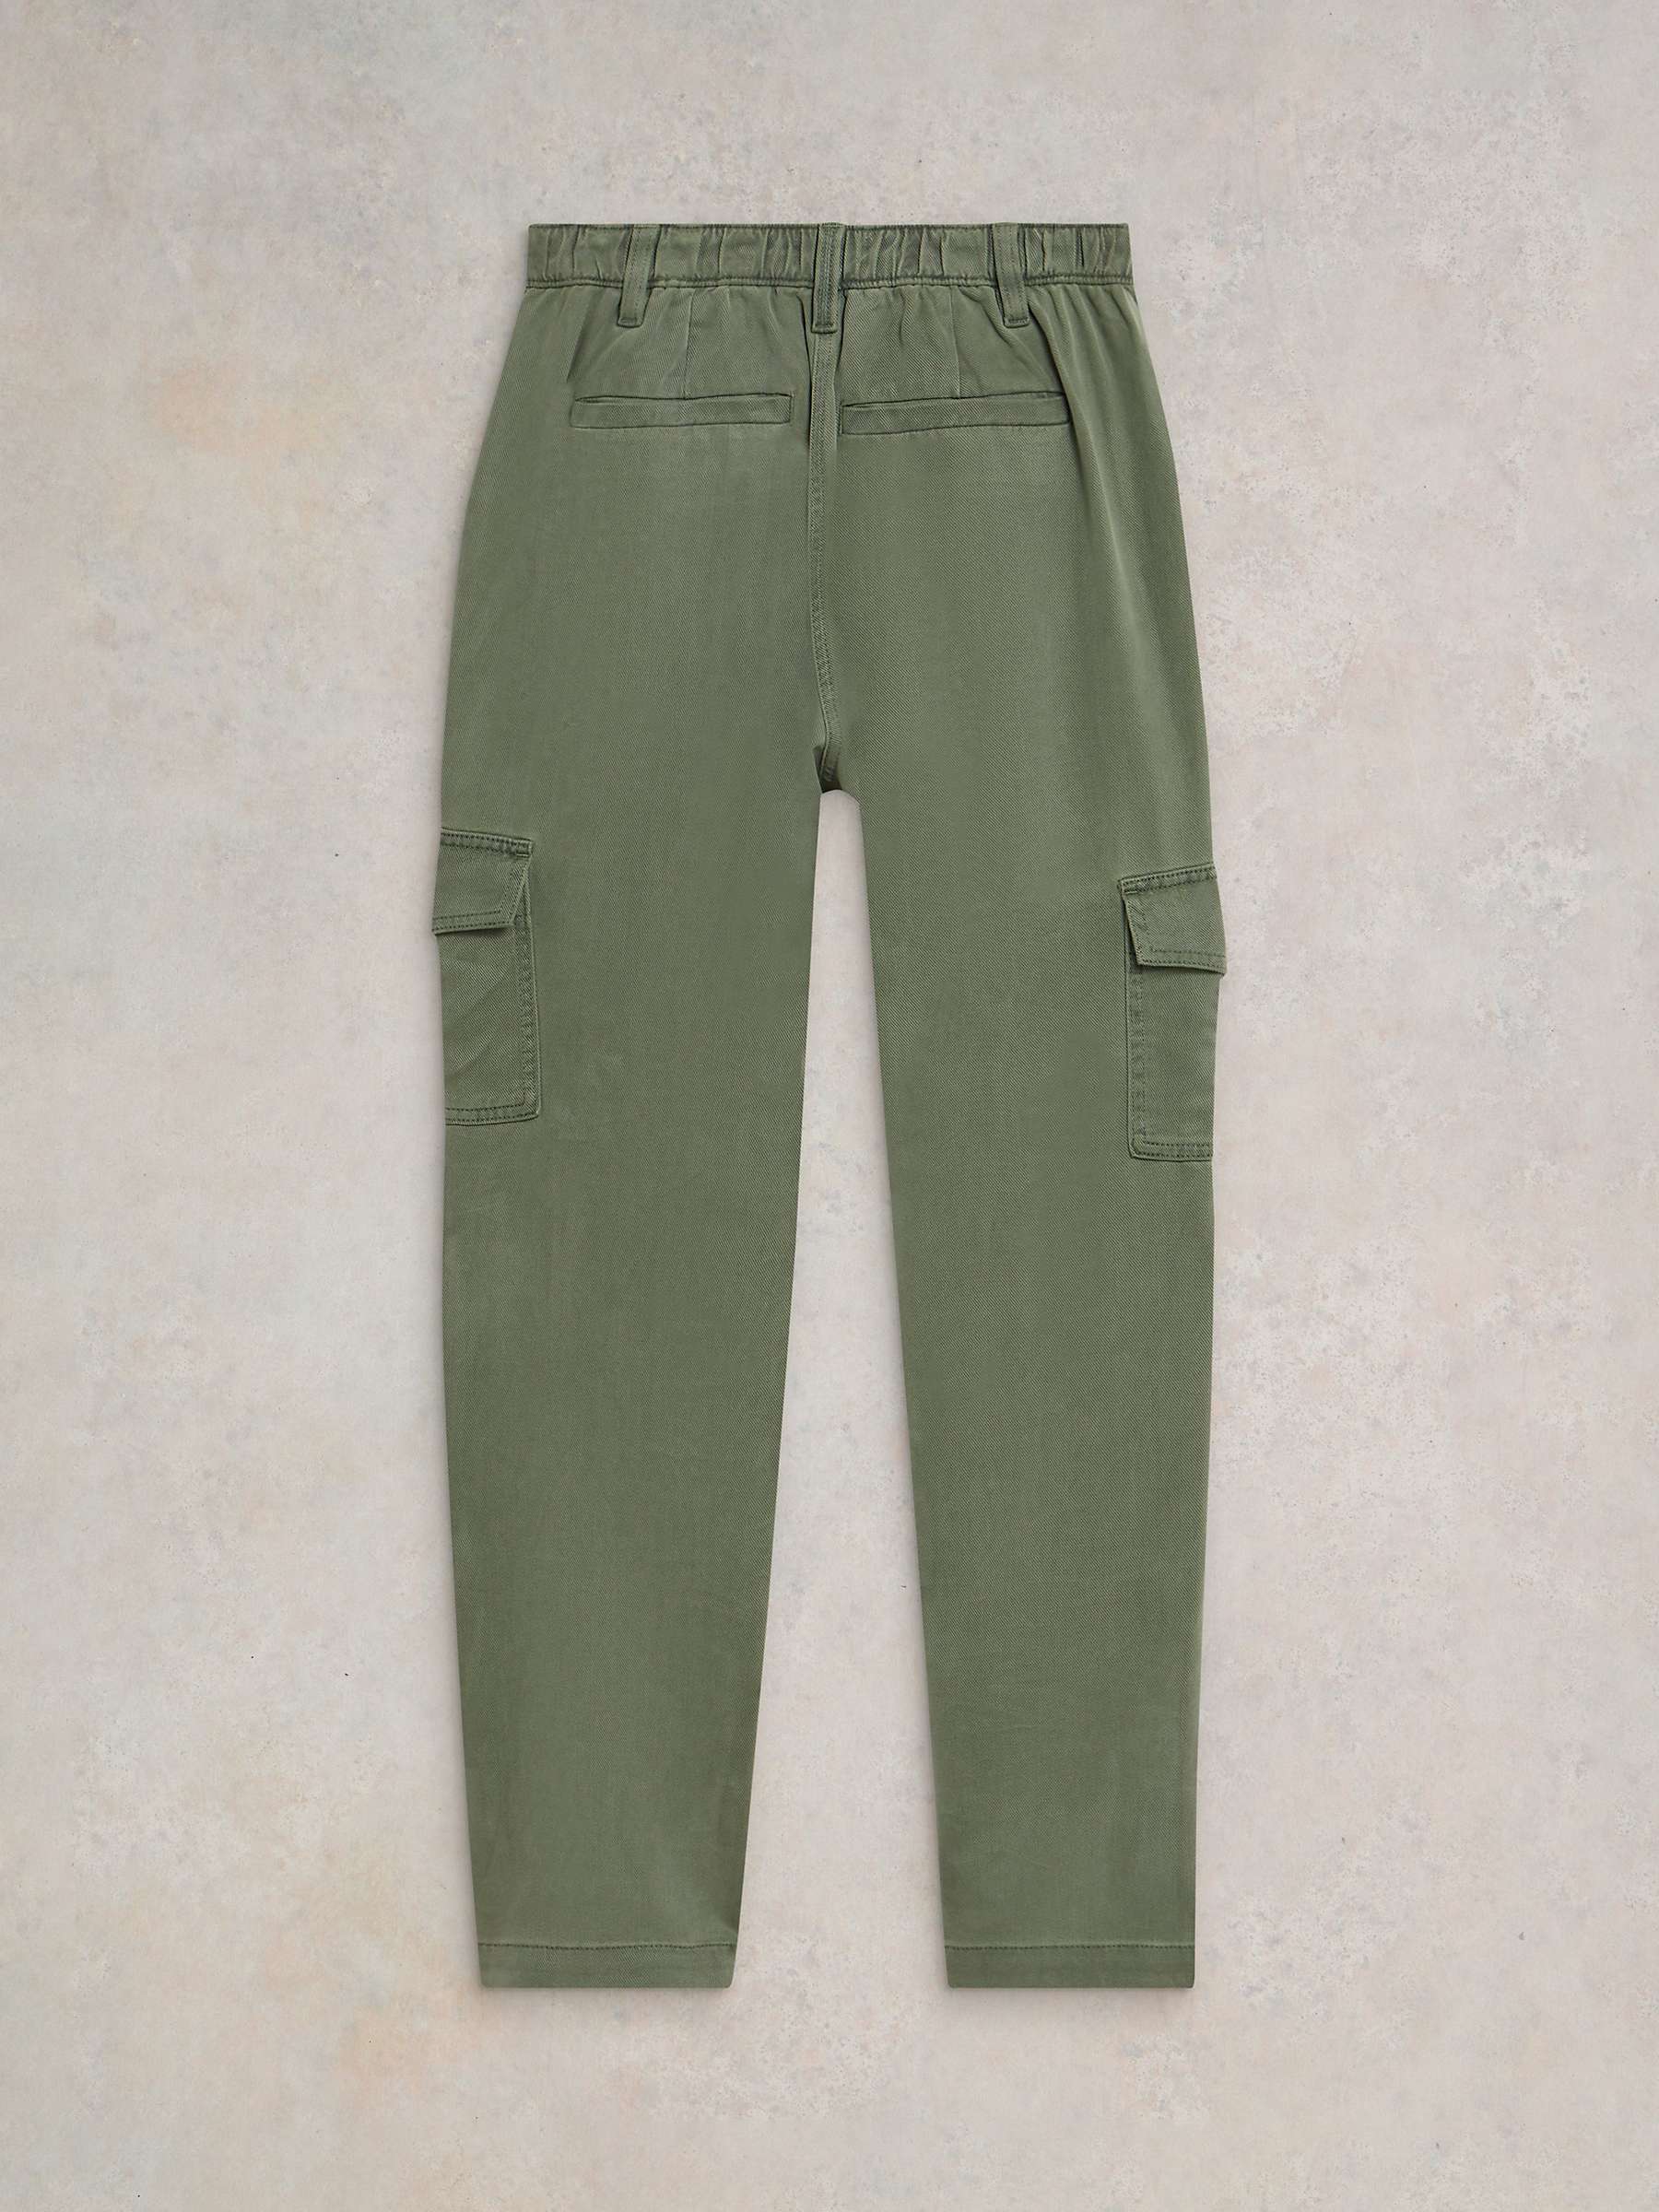 Buy White Stuff Arlo Tencel Cargo Trousers, Mid Green Online at johnlewis.com